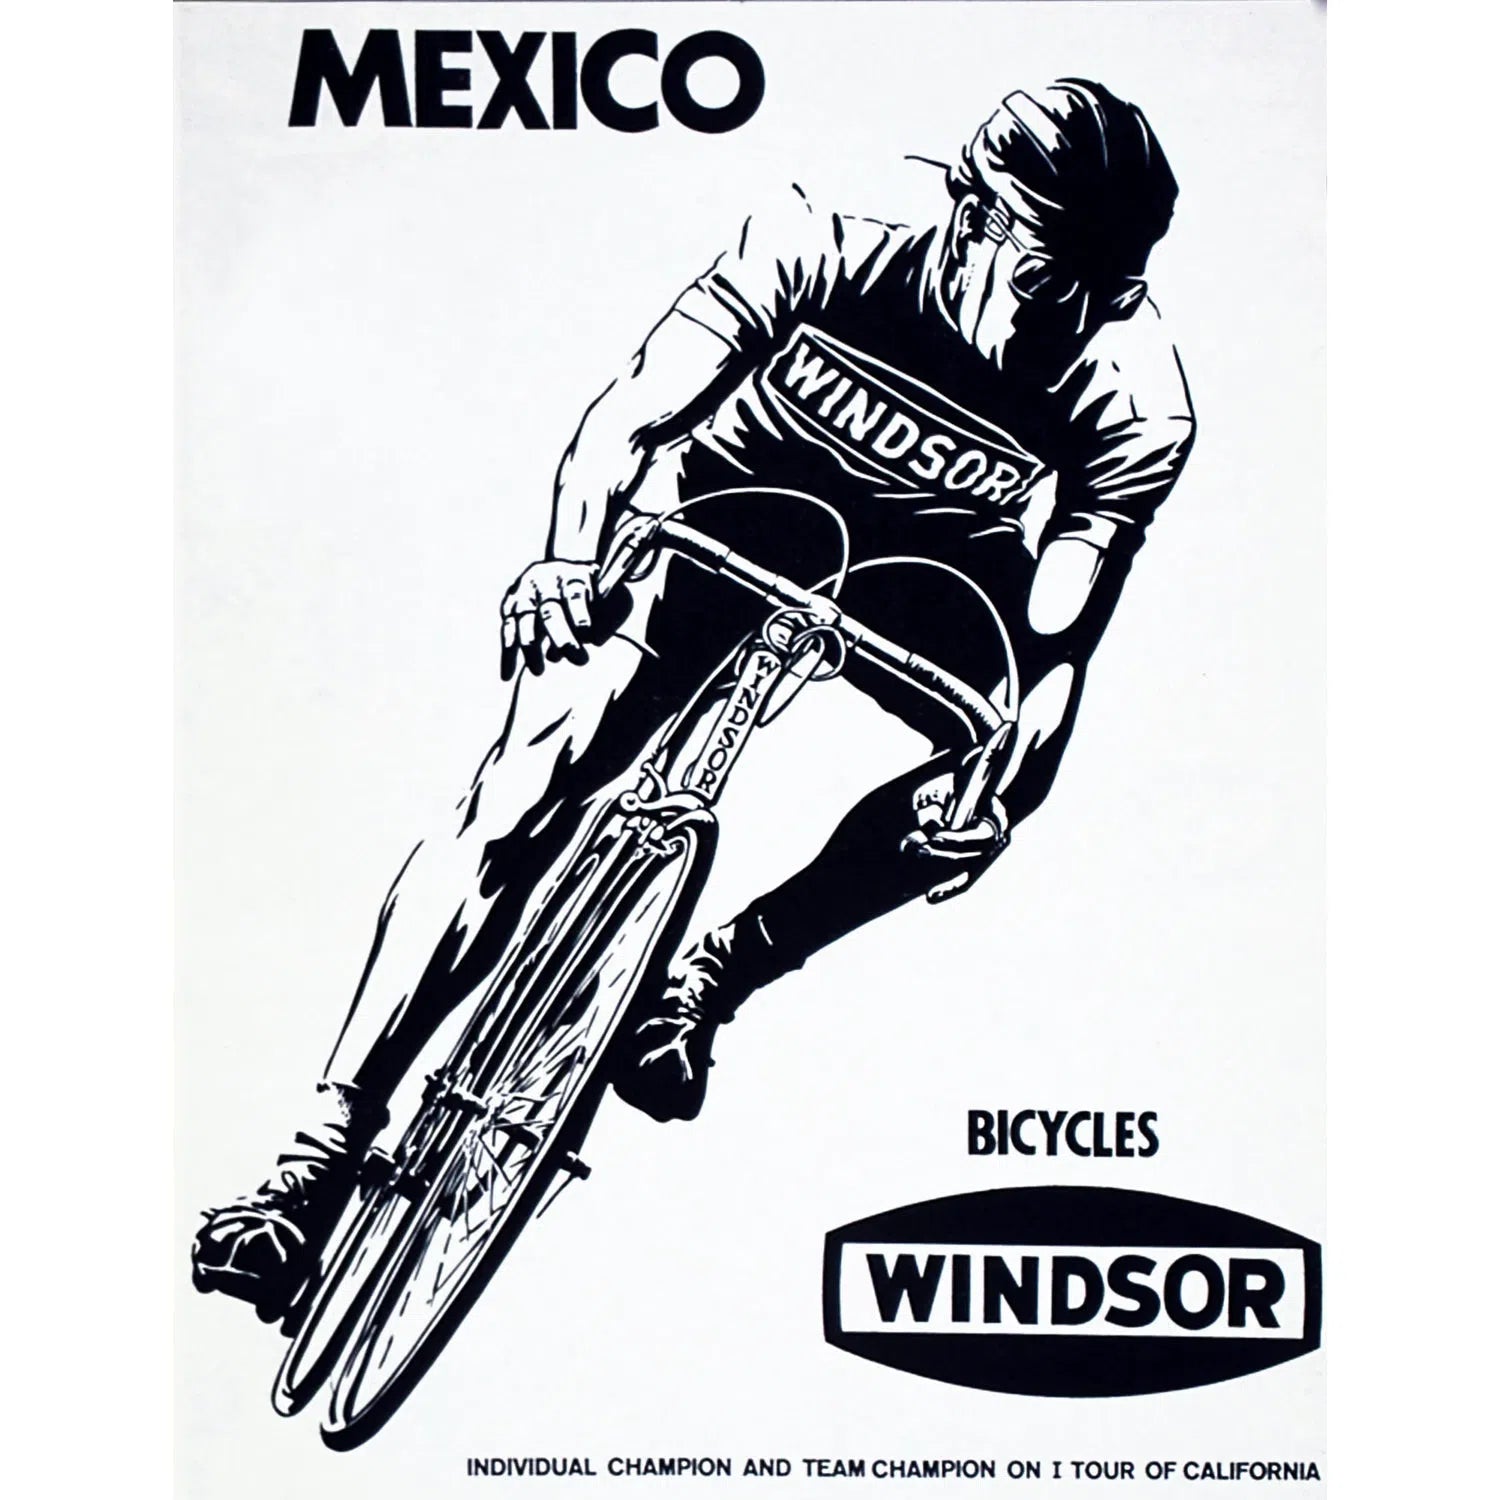 Mexico bicycles Windsor-Imagesdartistes